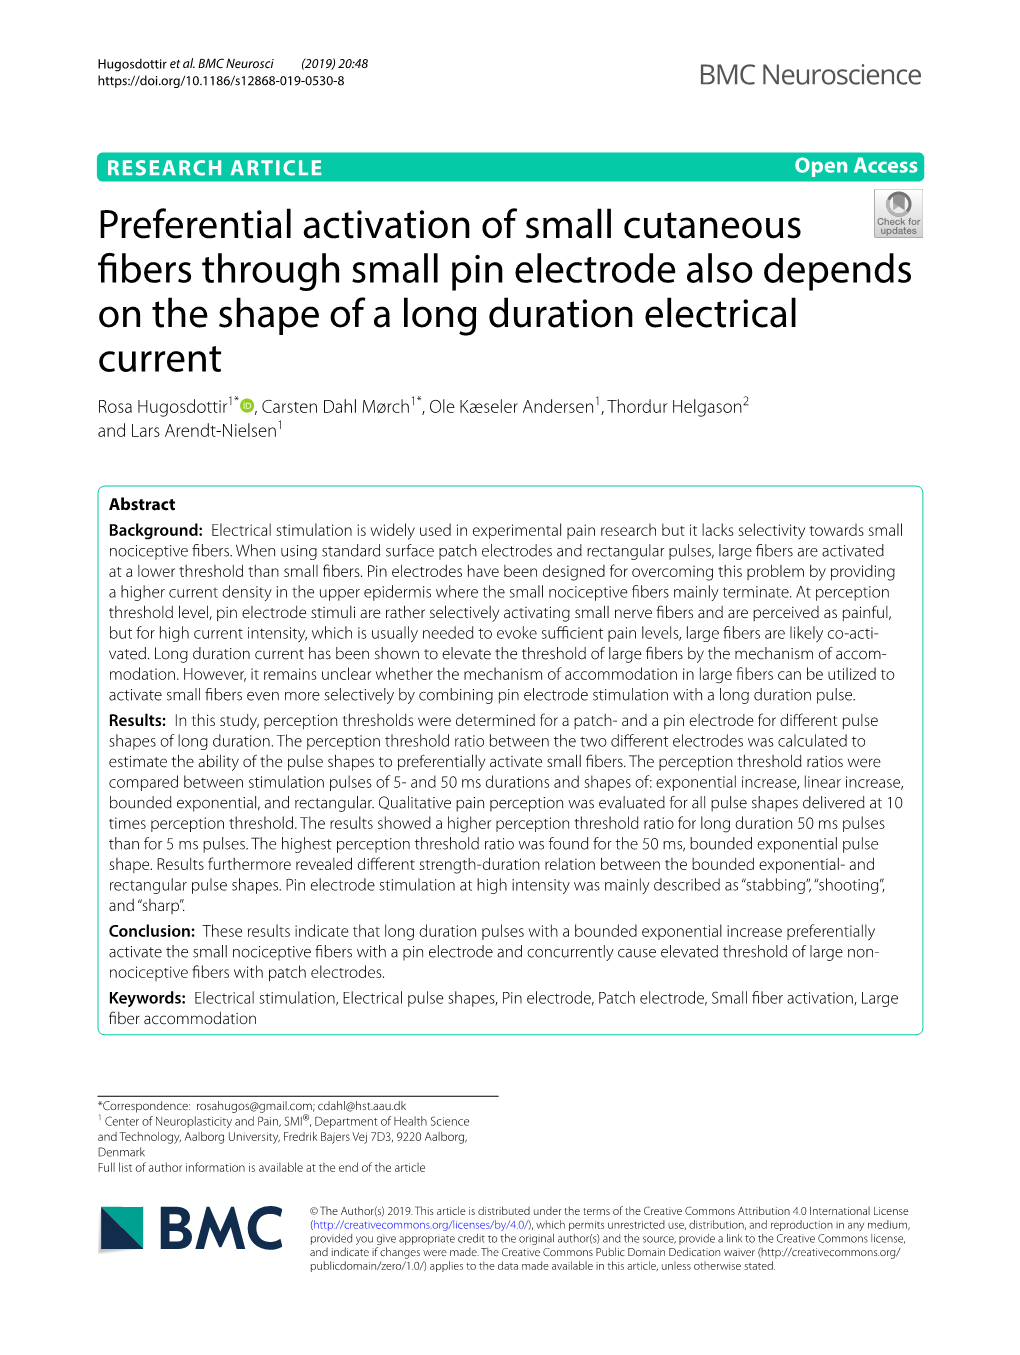 Preferential Activation of Small Cutaneous Fibers Through Small Pin